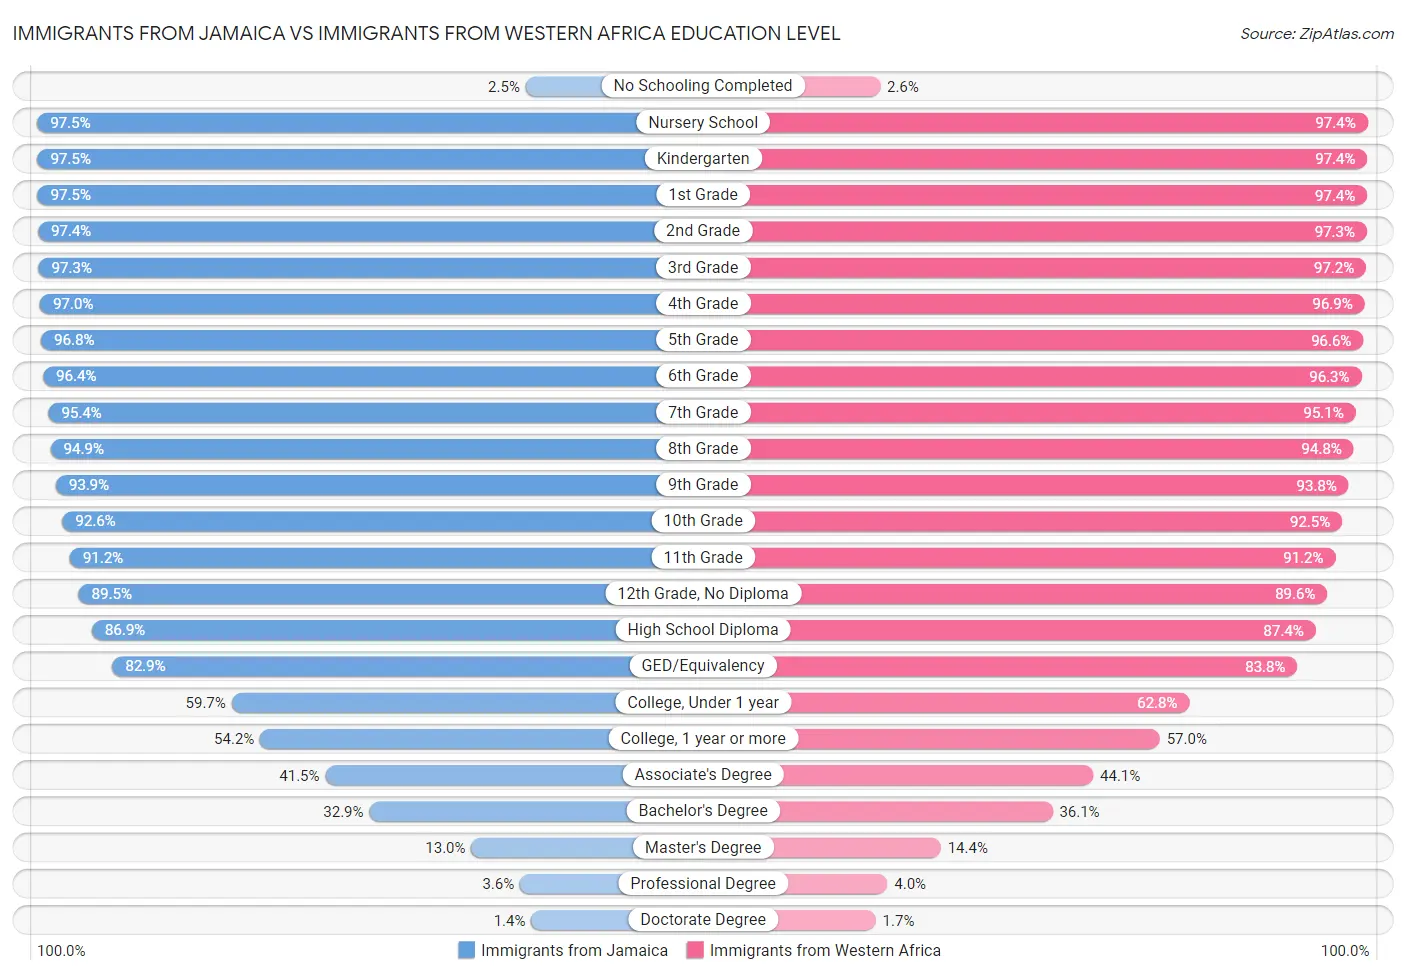 Immigrants from Jamaica vs Immigrants from Western Africa Education Level